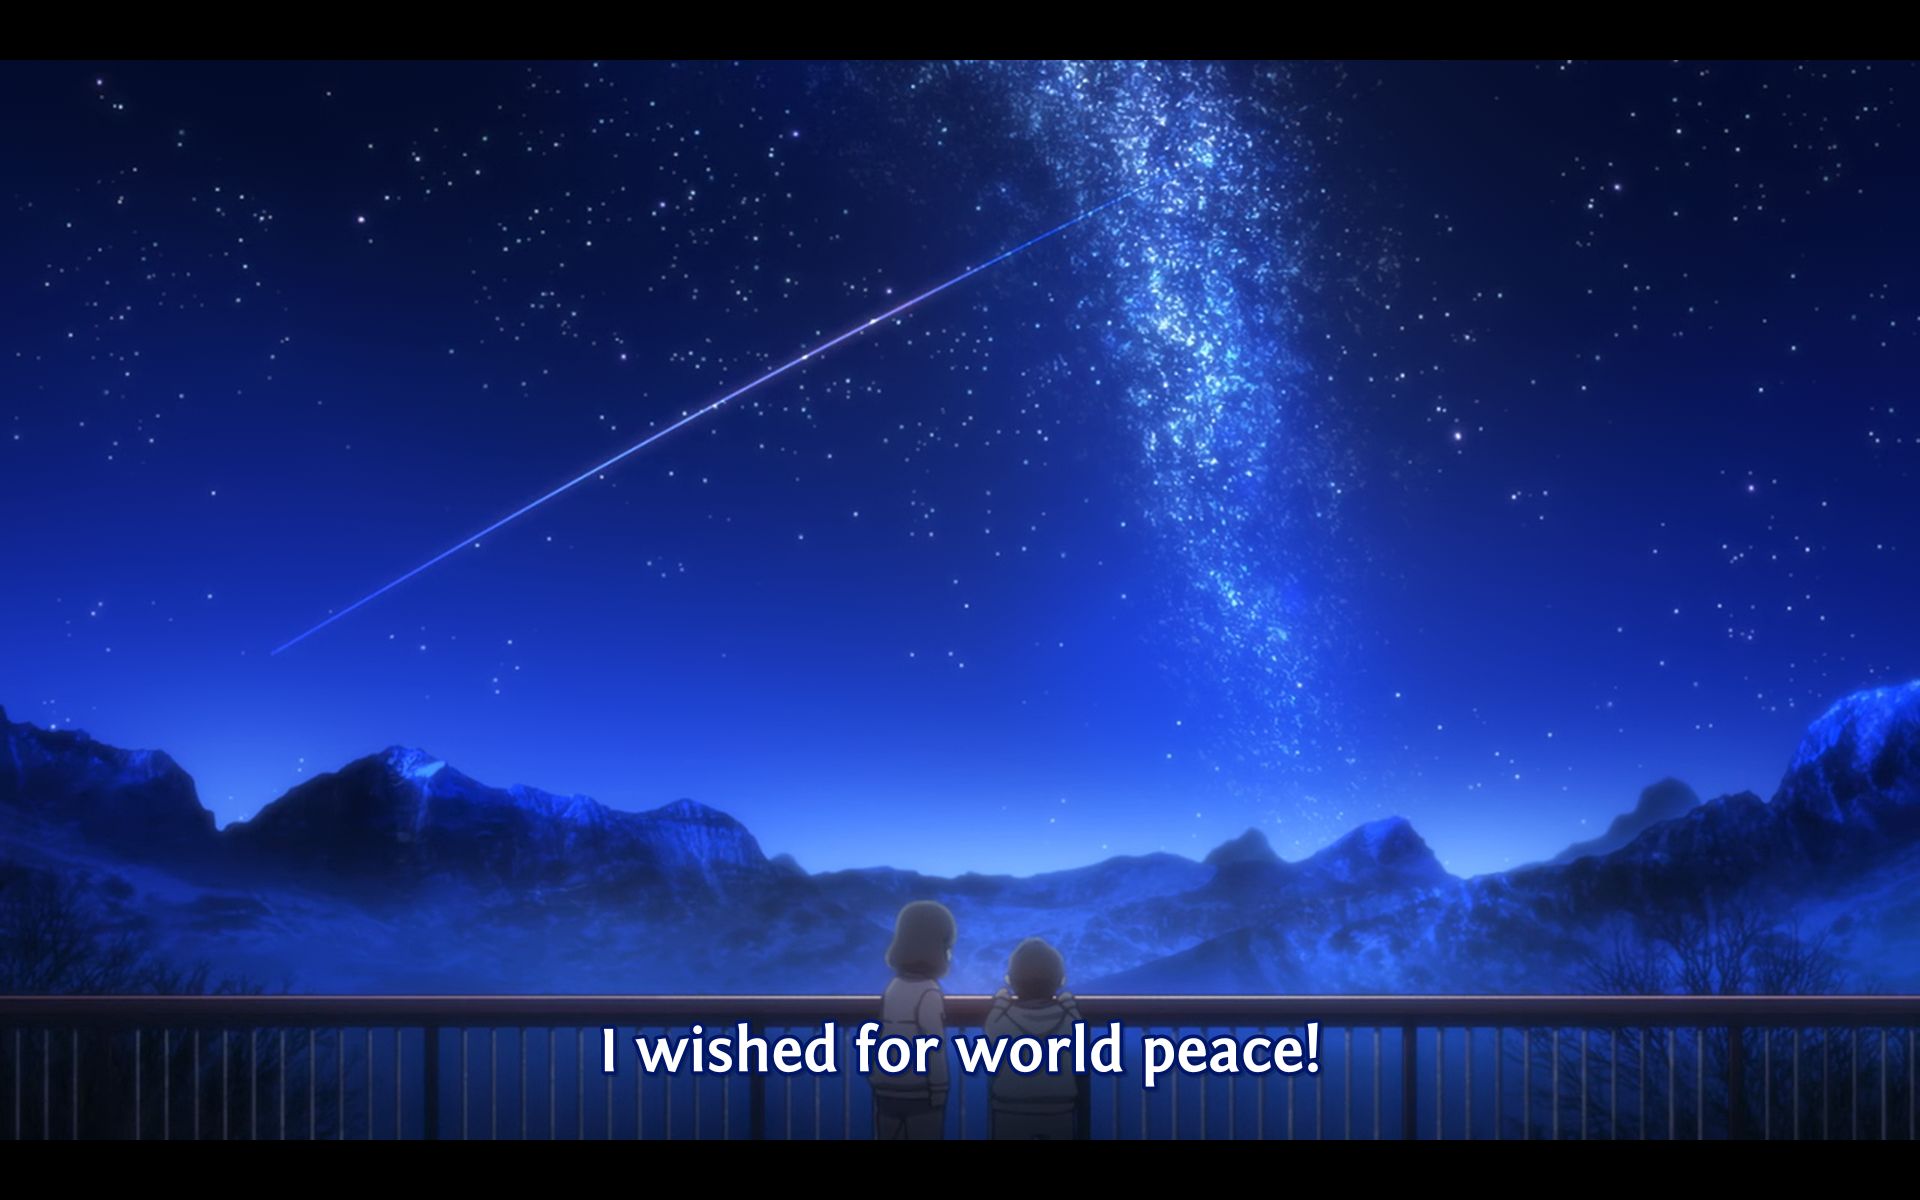 You have to watch this anime to find out whether their wish will come true or not.